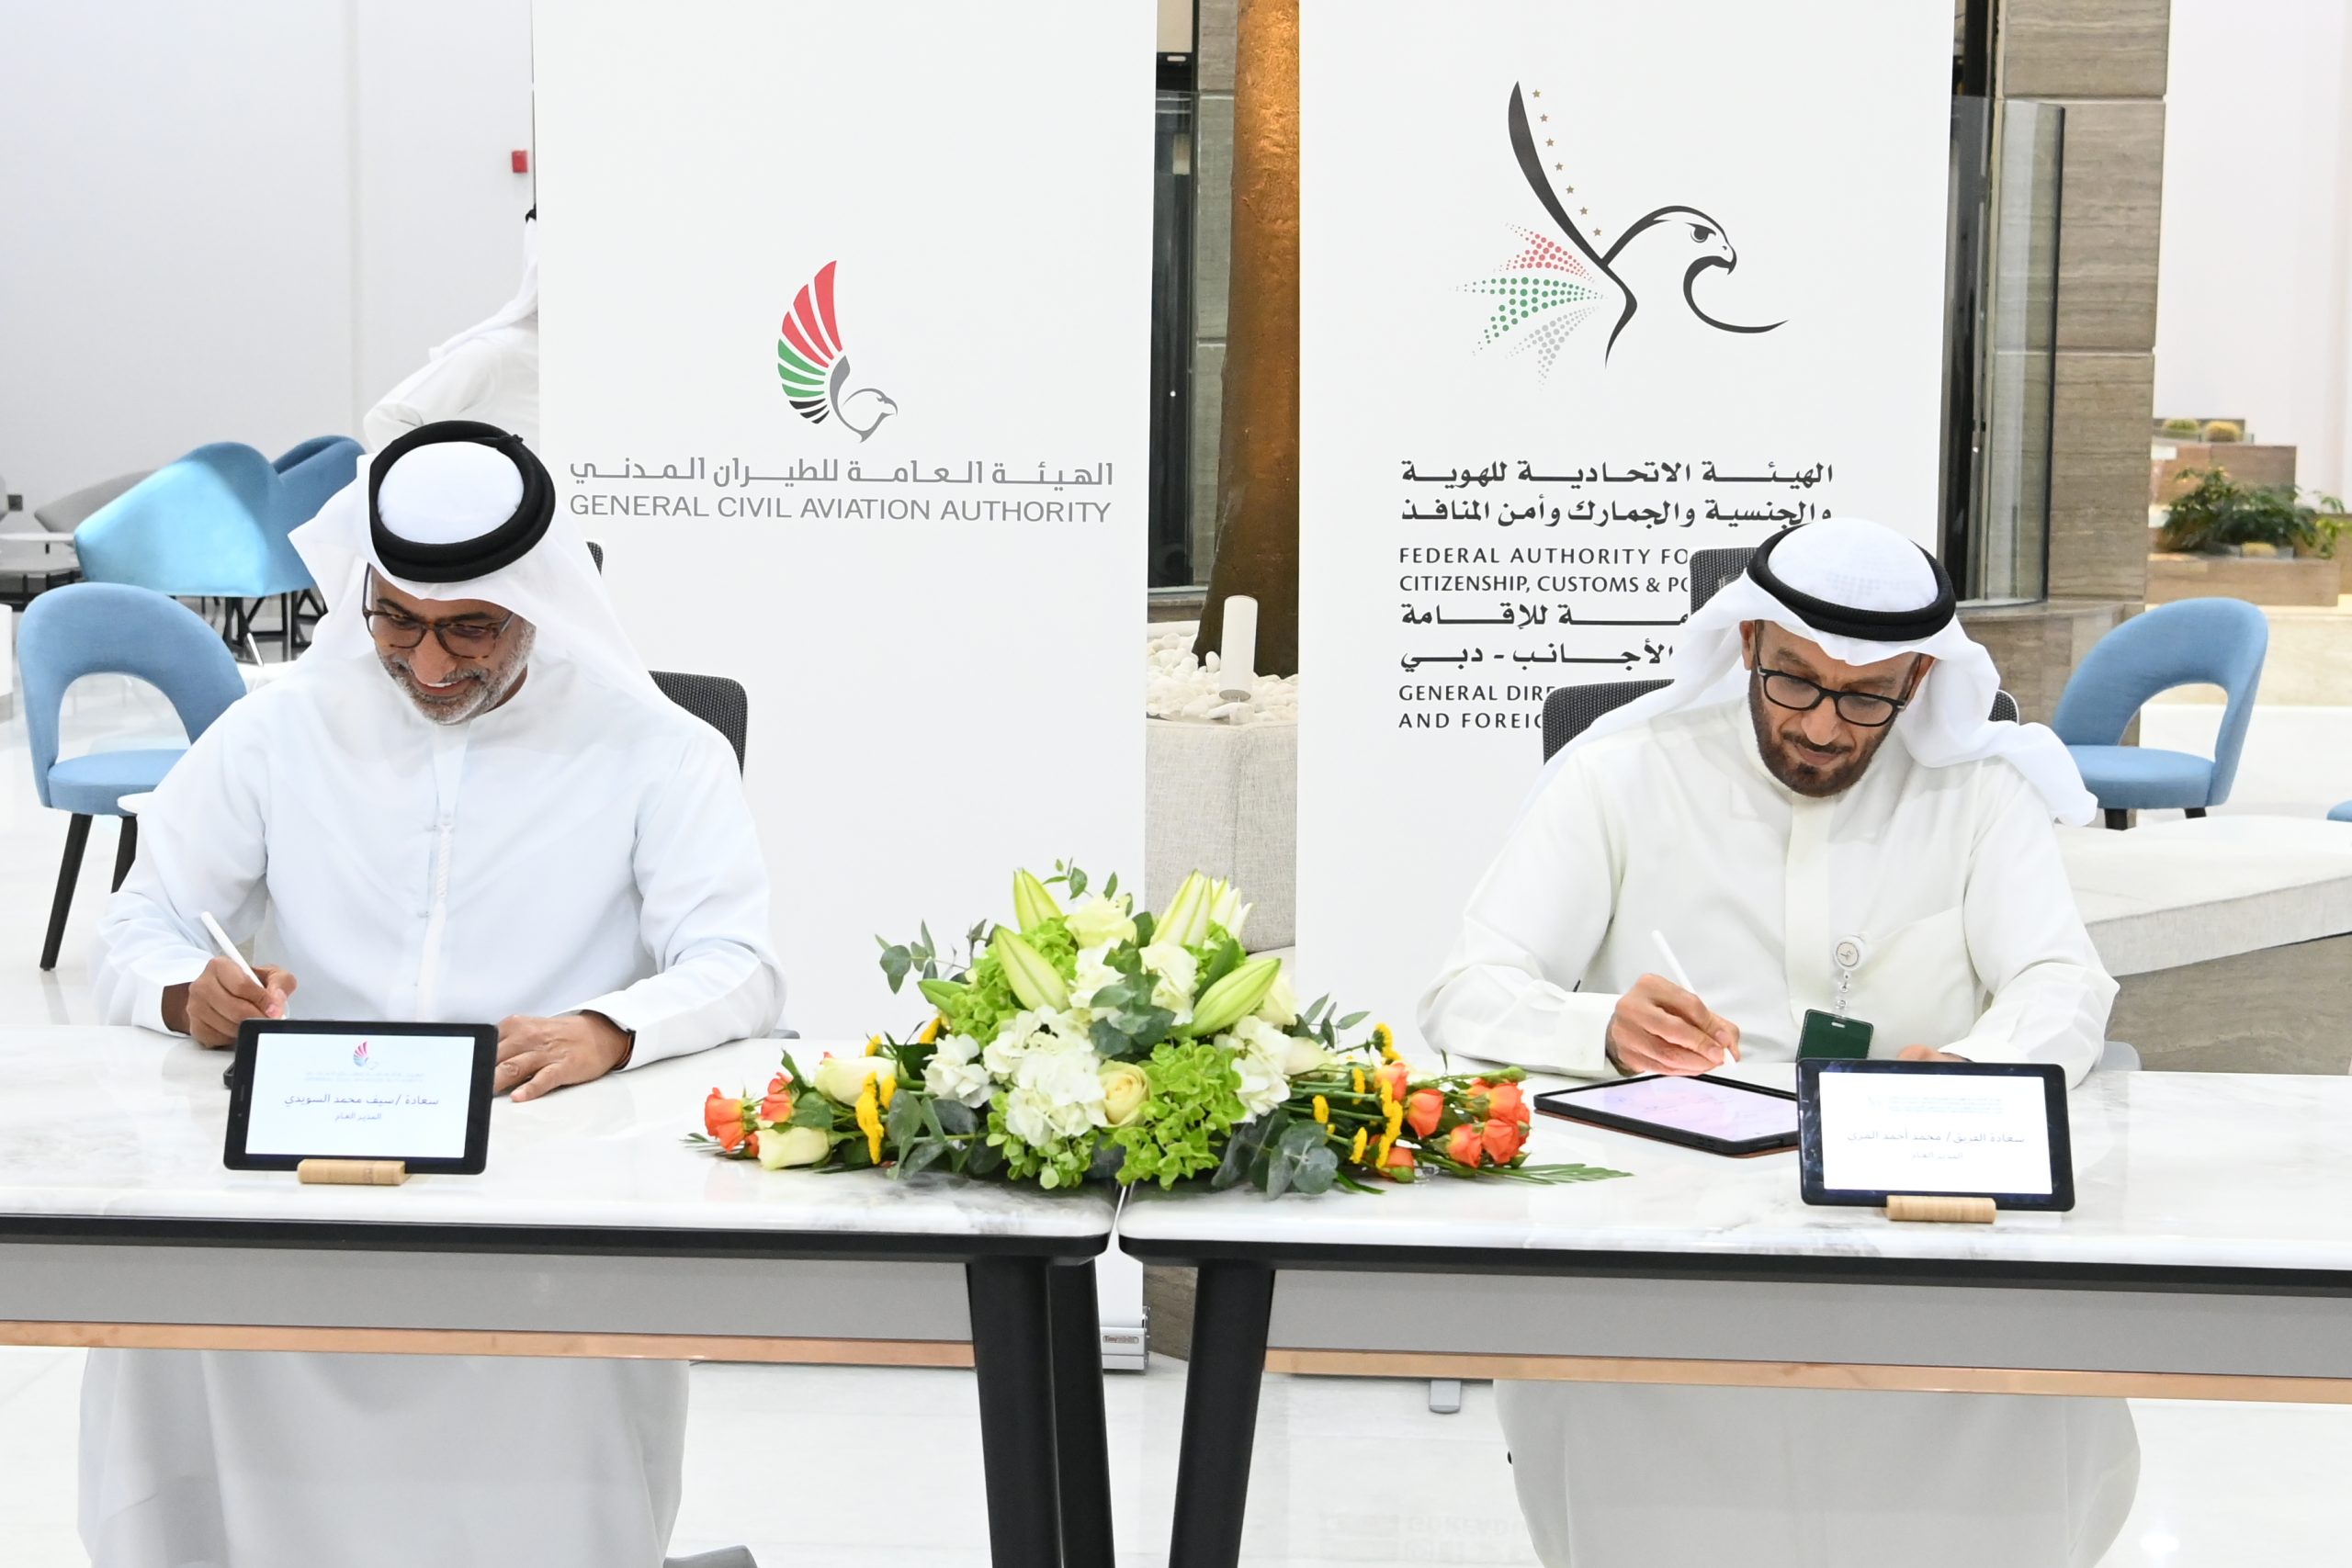 Cooperation between Dubai Residency and the General Civil Aviation Authority